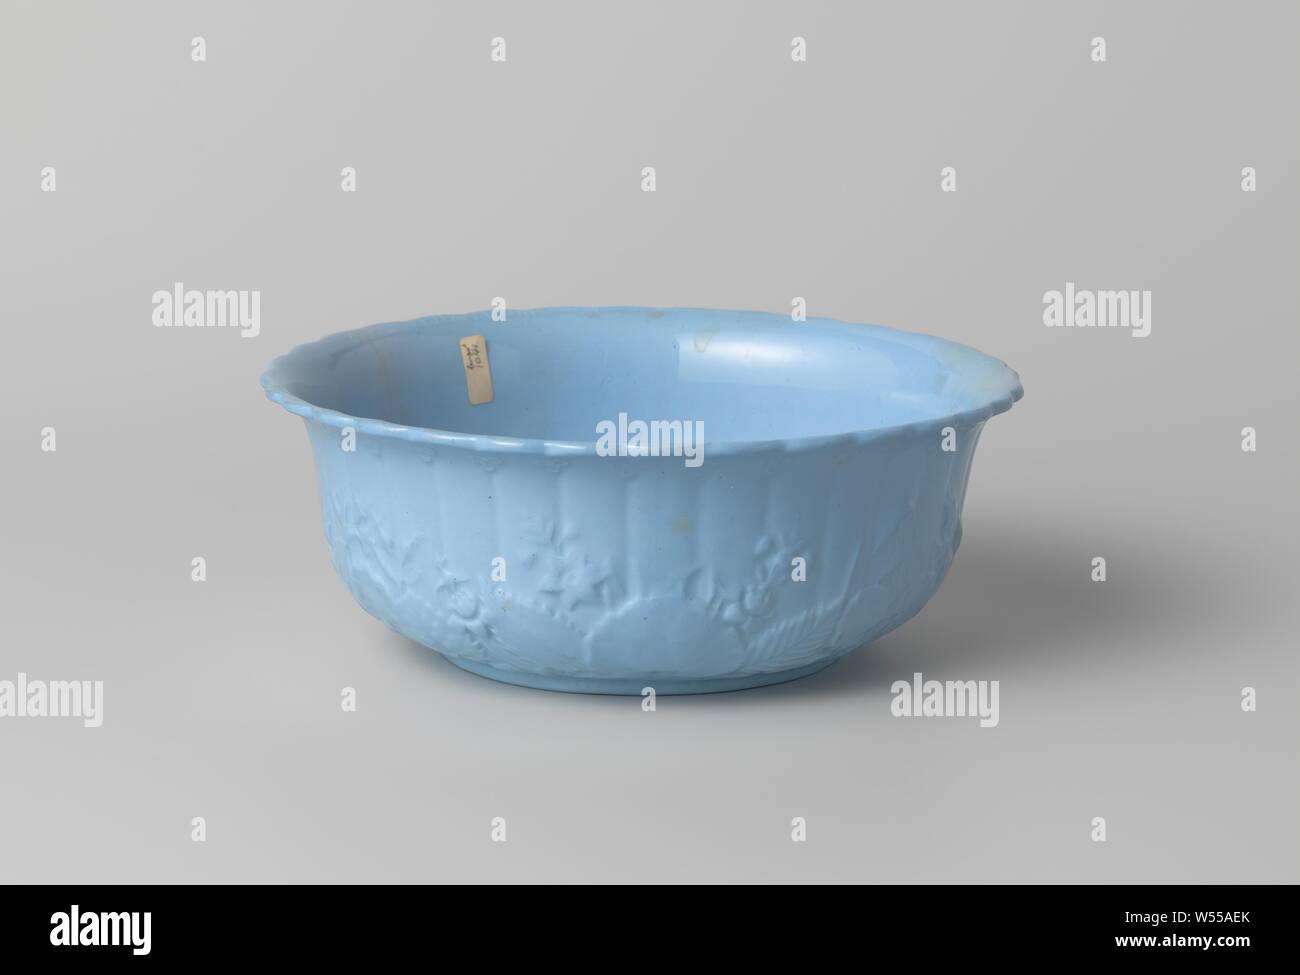 Bowl, blue, with flowers and leaves in relief, Bowl of earthenware, blue stone. The walls with flowers and leaves in relief, the inside smooth. The bowl has a scalloped top edge., Petrus Regout, Maastricht, c. 1860 - c. 1890, h 8.0 cm × d 20.7 cm Stock Photo